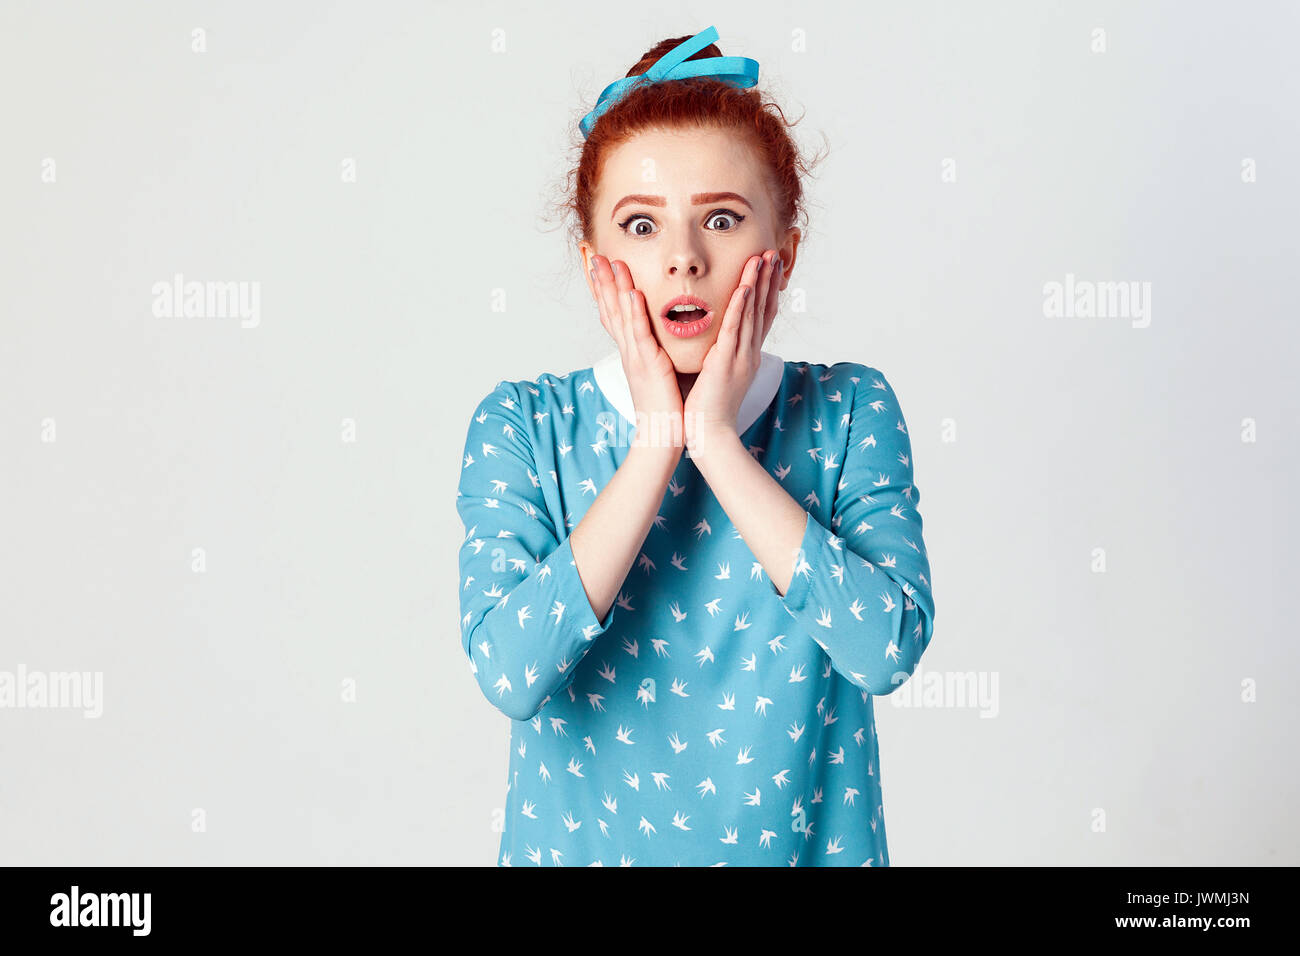 Human face expressions and emotions. Redhead young girl screaming with shock, holding hands on her cheeks. Isolated studio shot on gray background. Stock Photo